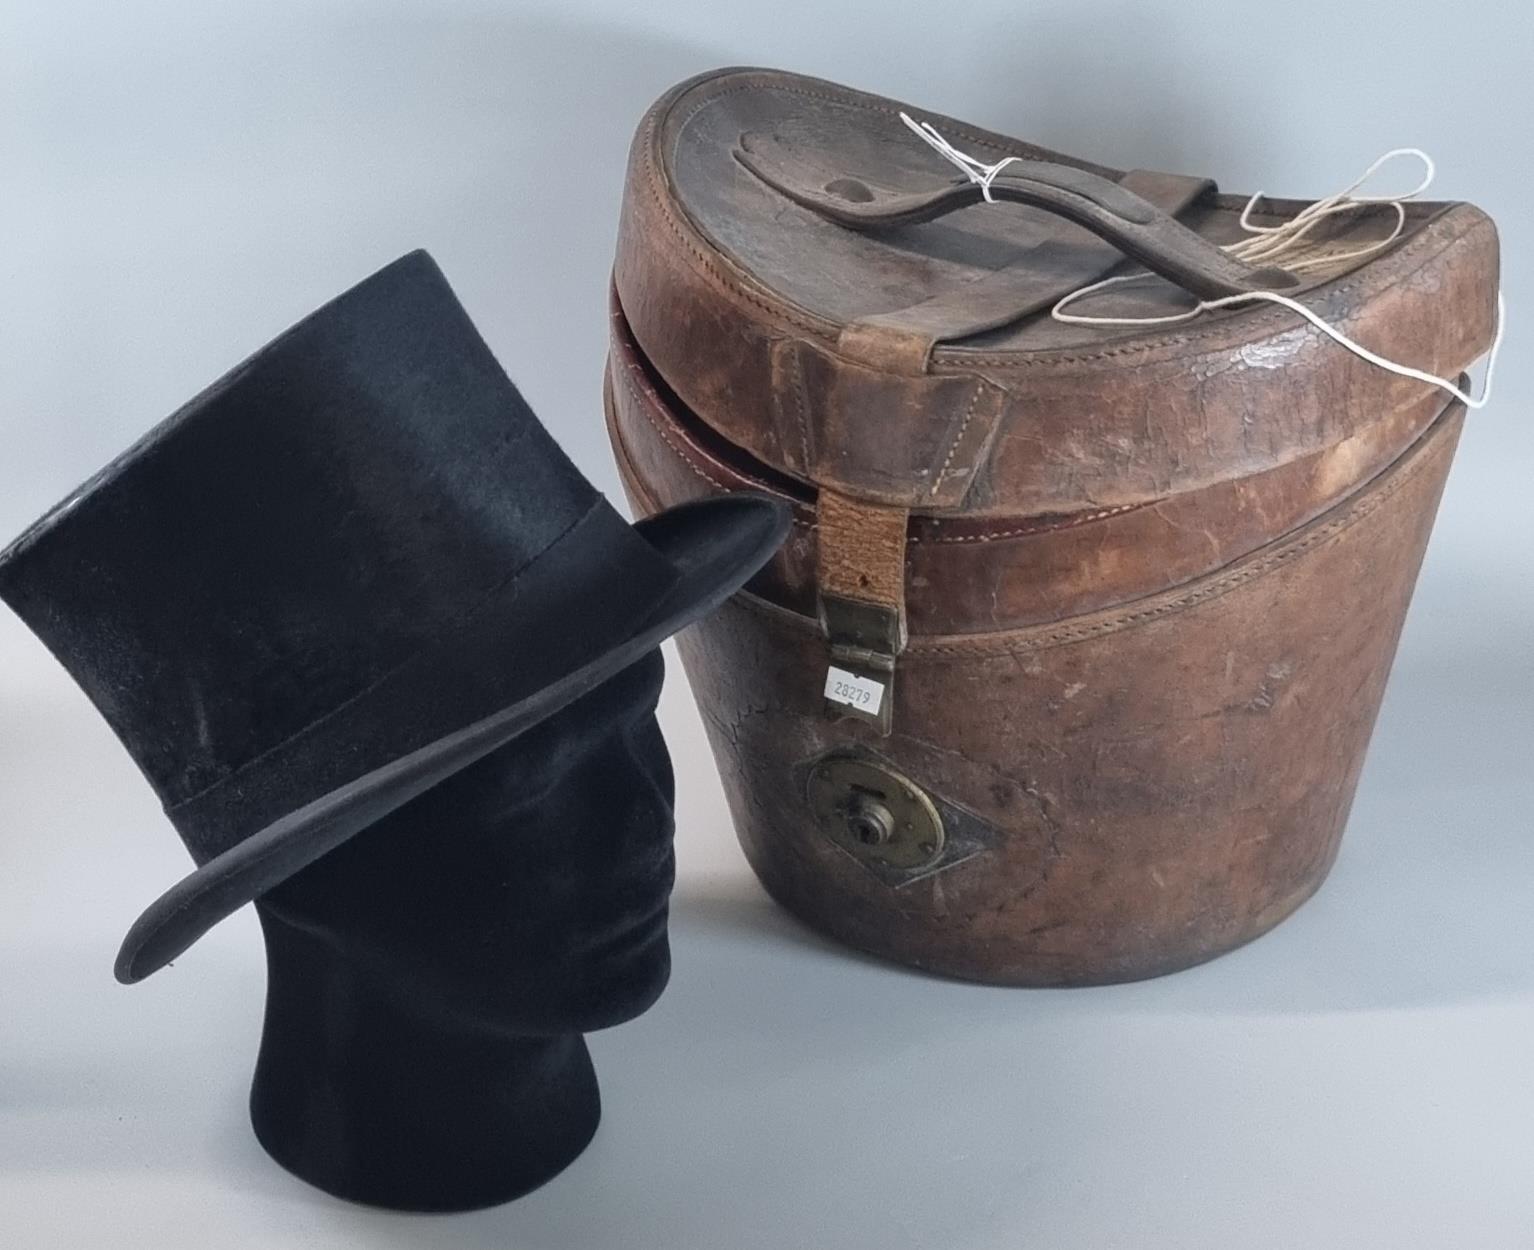 A. J. White Hatters and Cap Makers, vintage top hat in fitted leather case. (B.P. 21% + VAT)